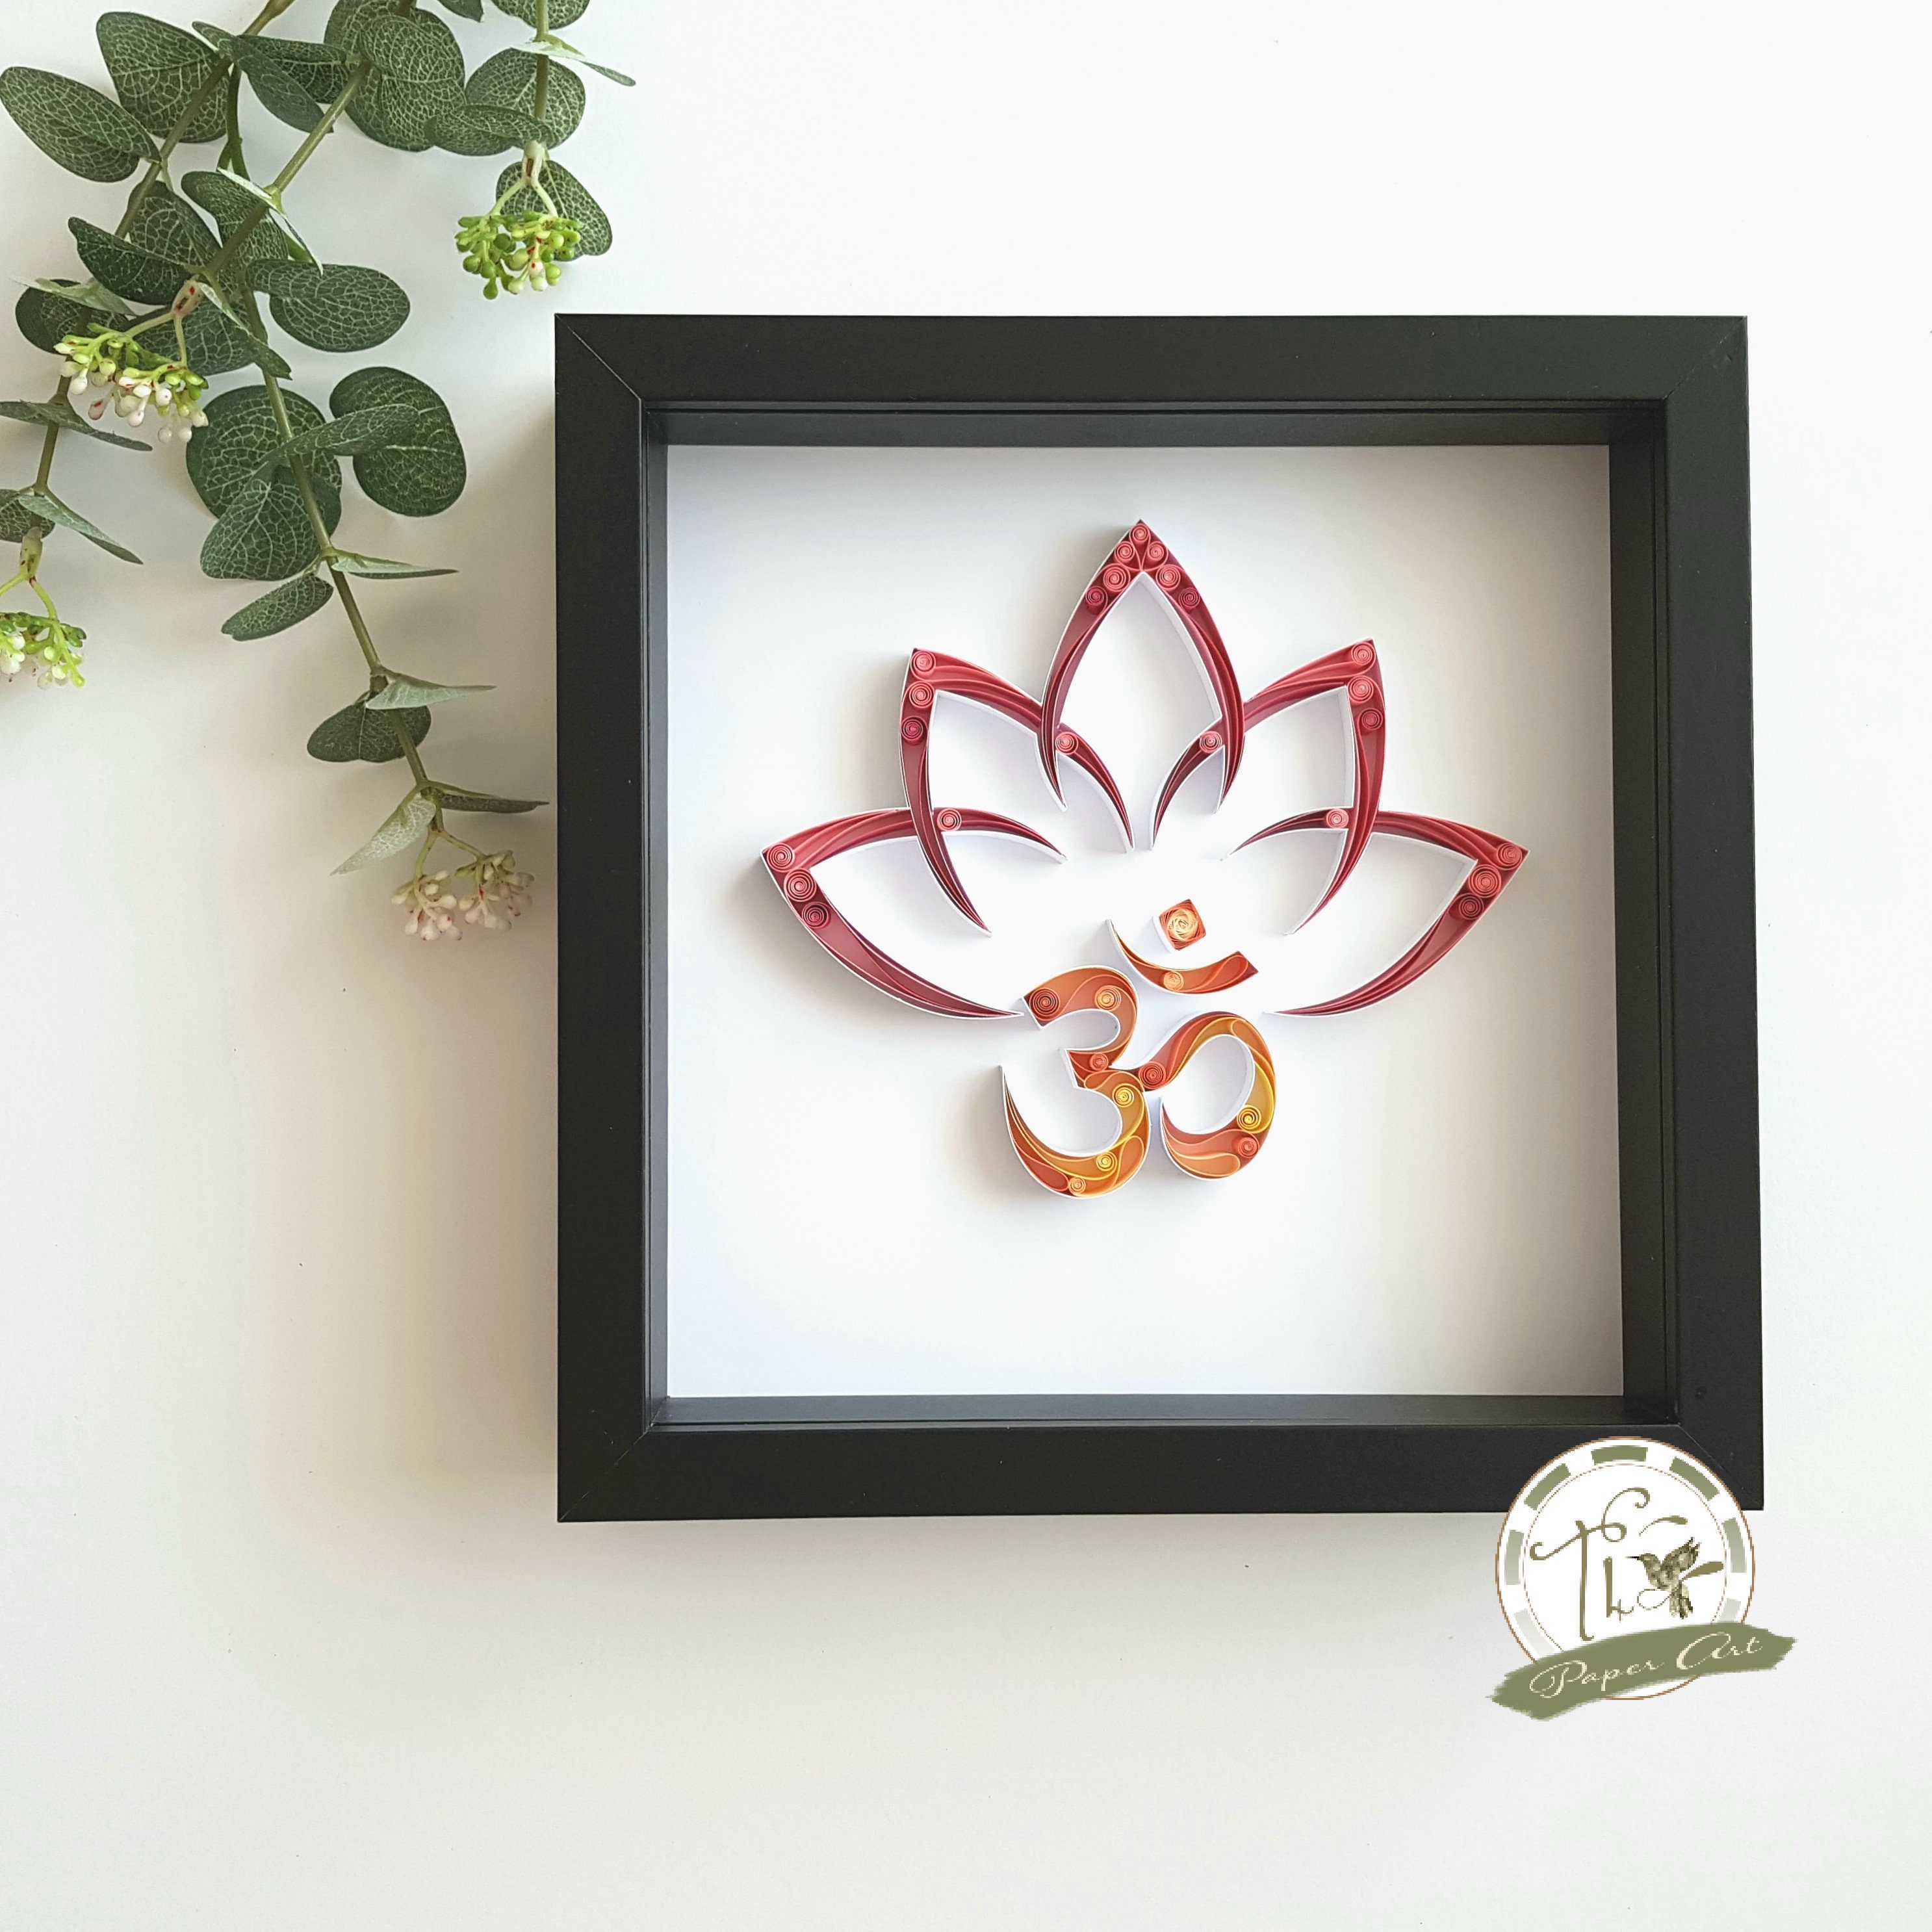 Lotus Blossom Lariat Necklace from The Art of Quilling Pap…